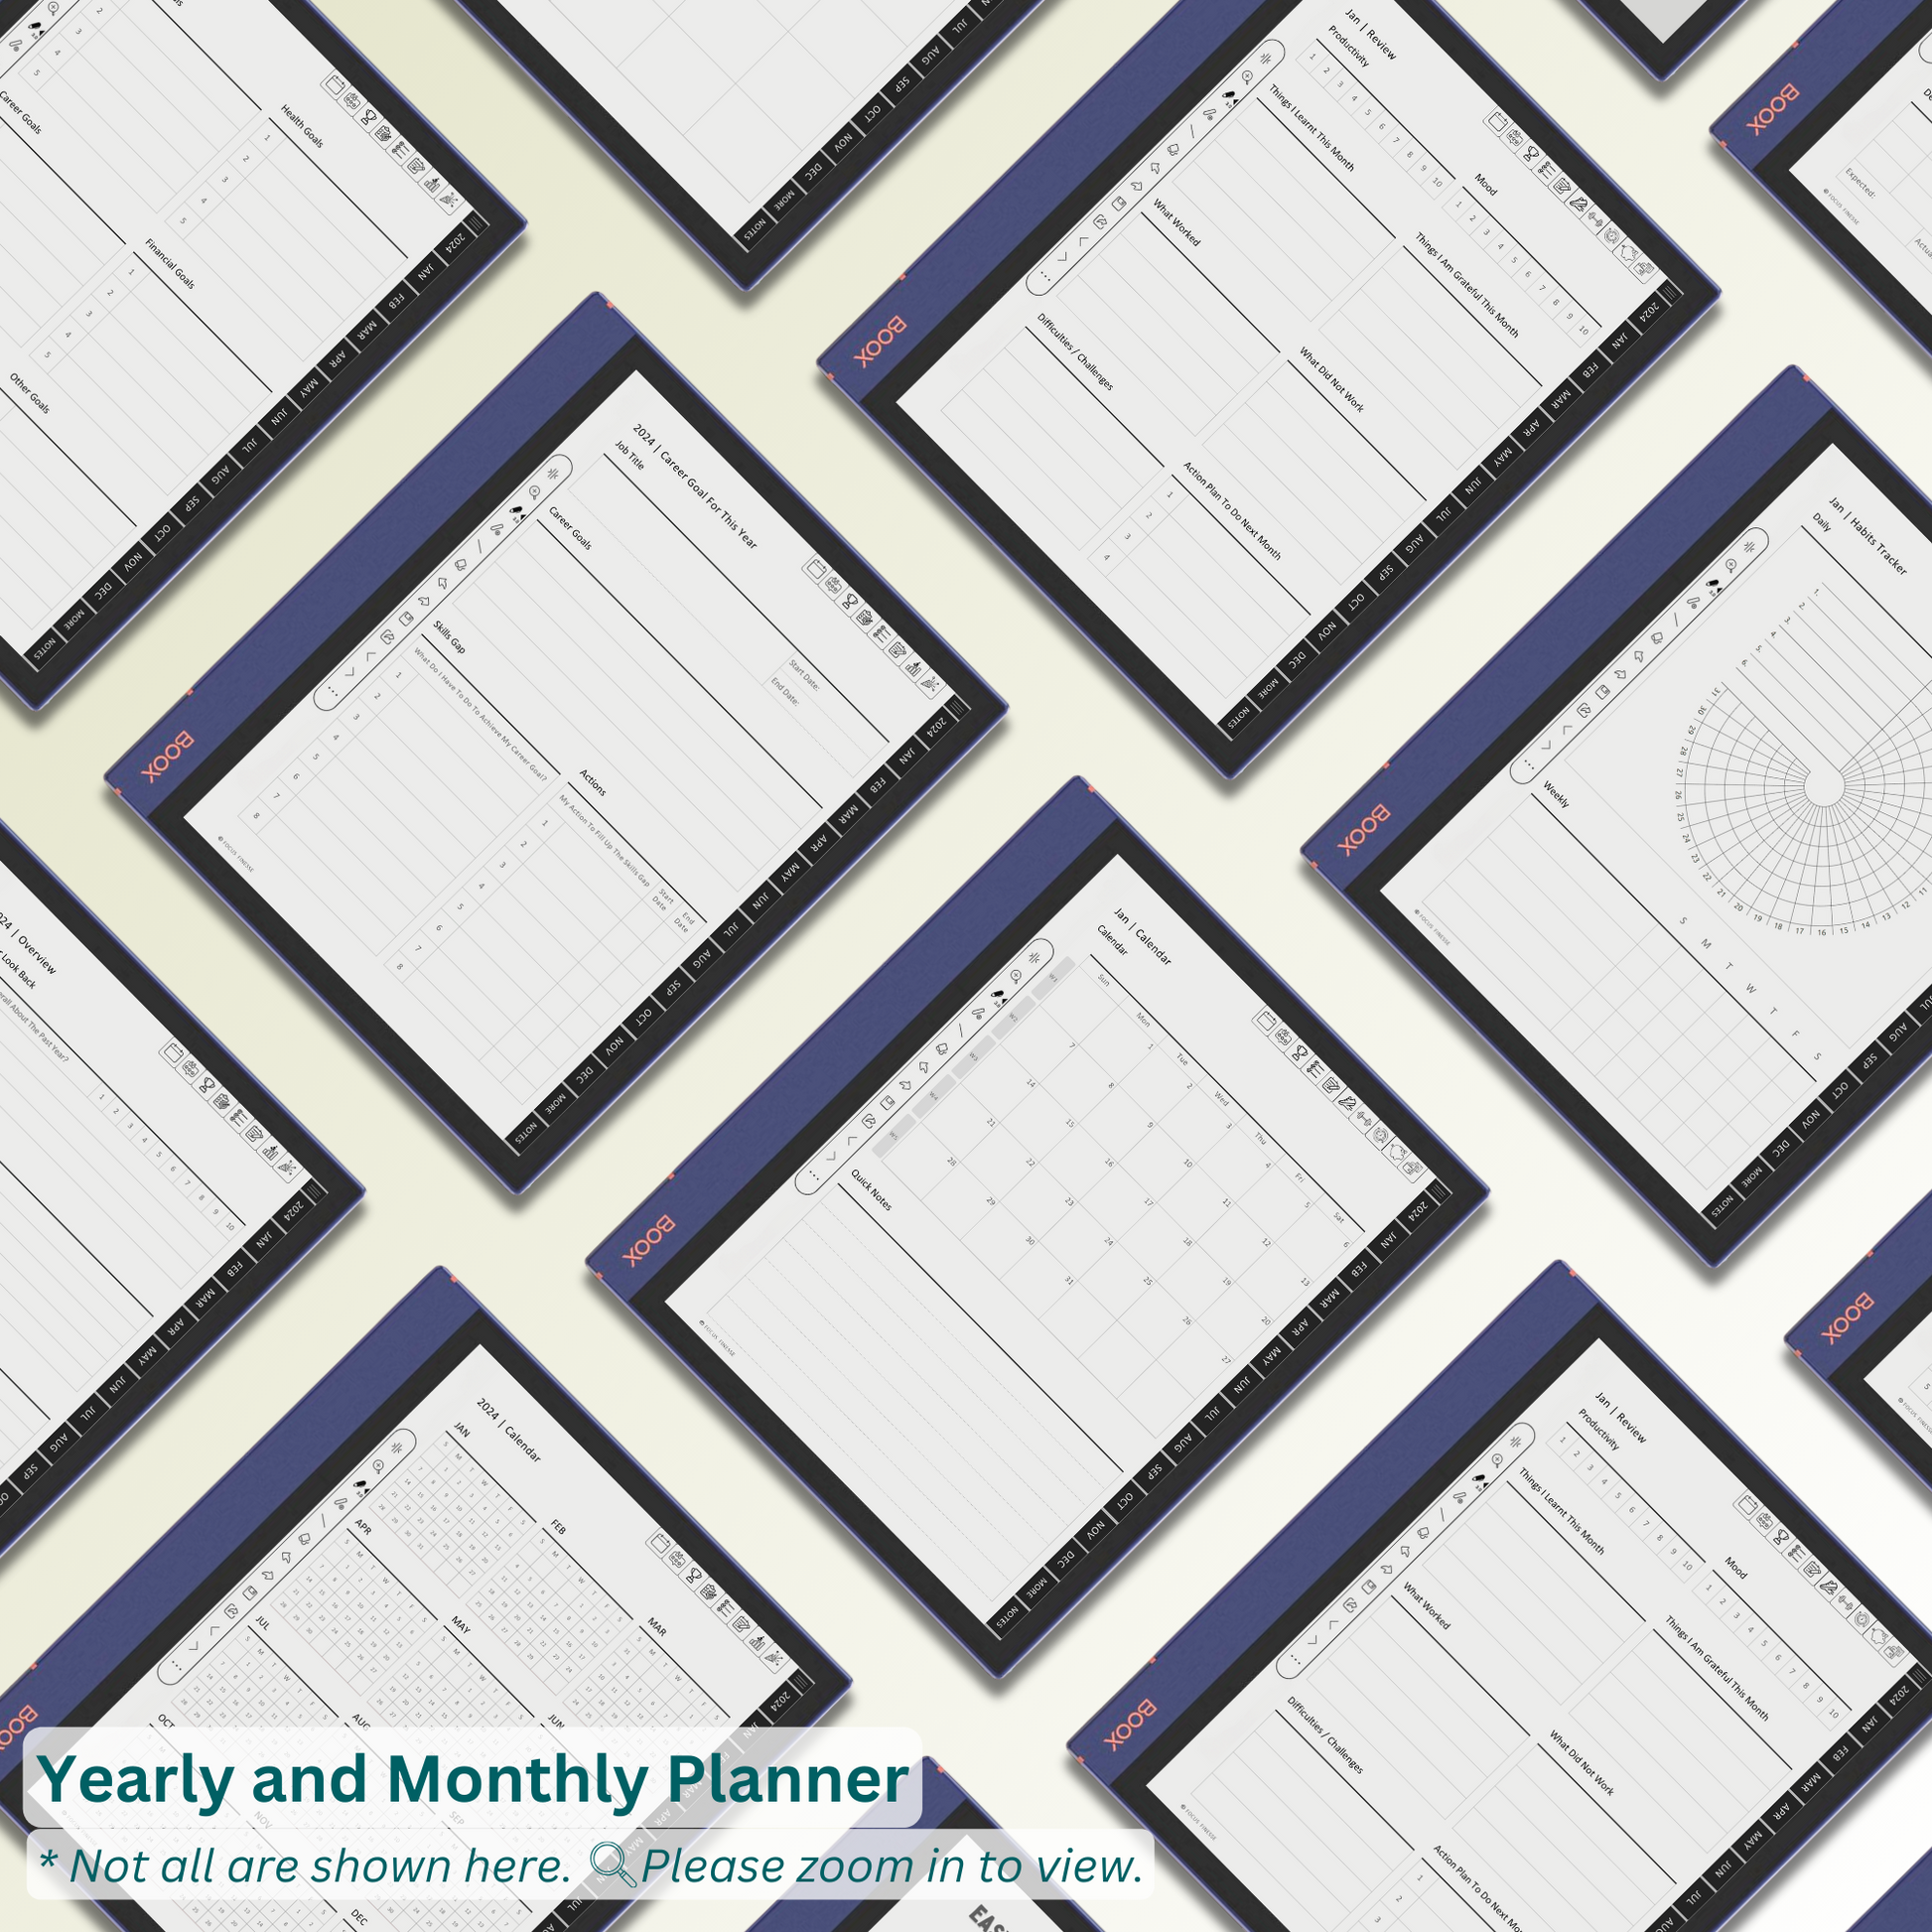 Onyx Boox Monthly Planner Templates.